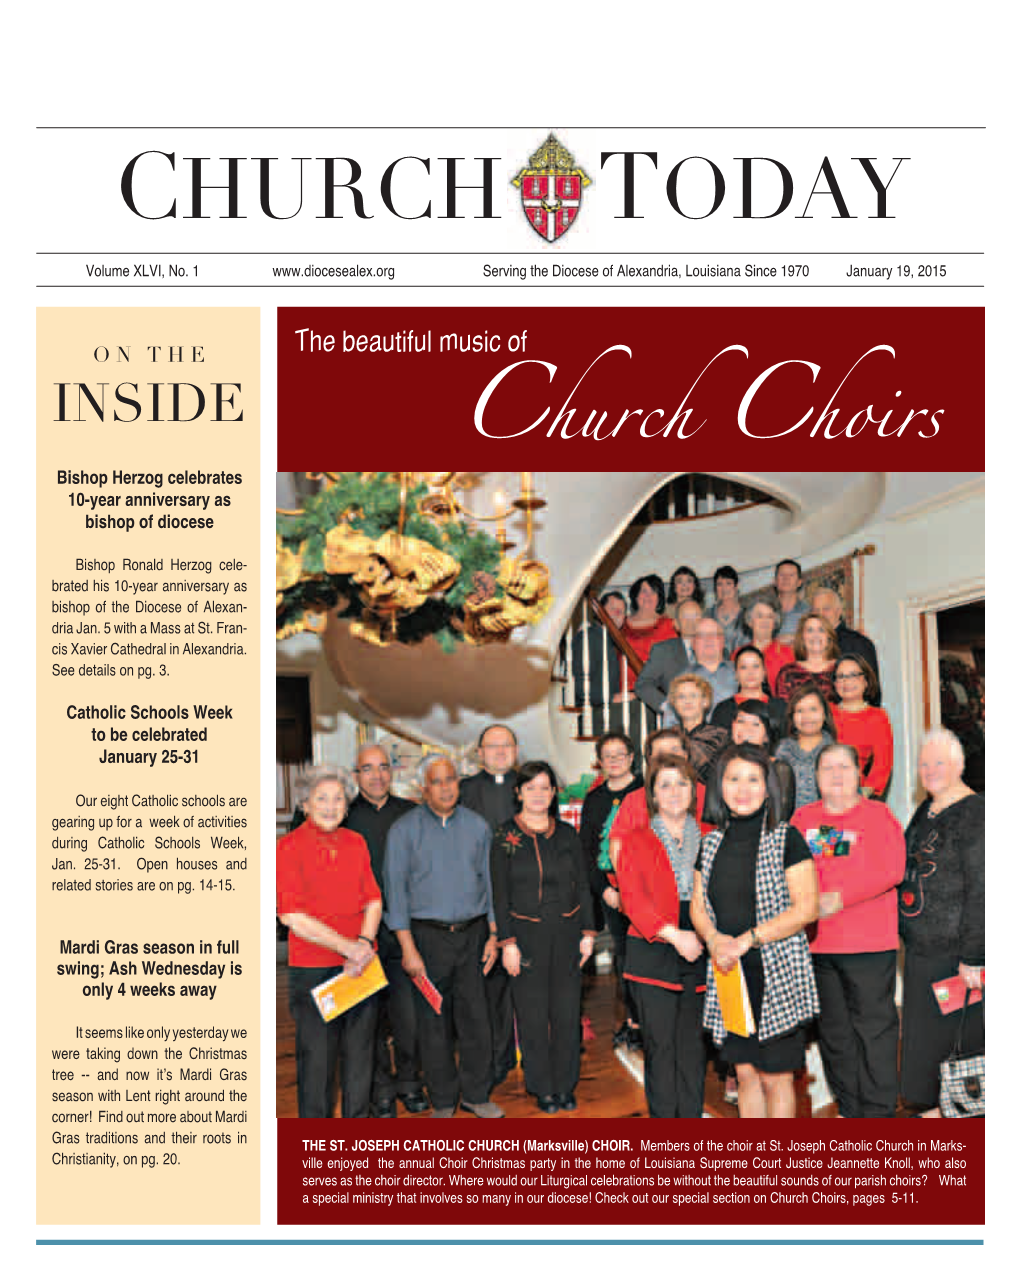 The Church Today, Jan. 19, 2015